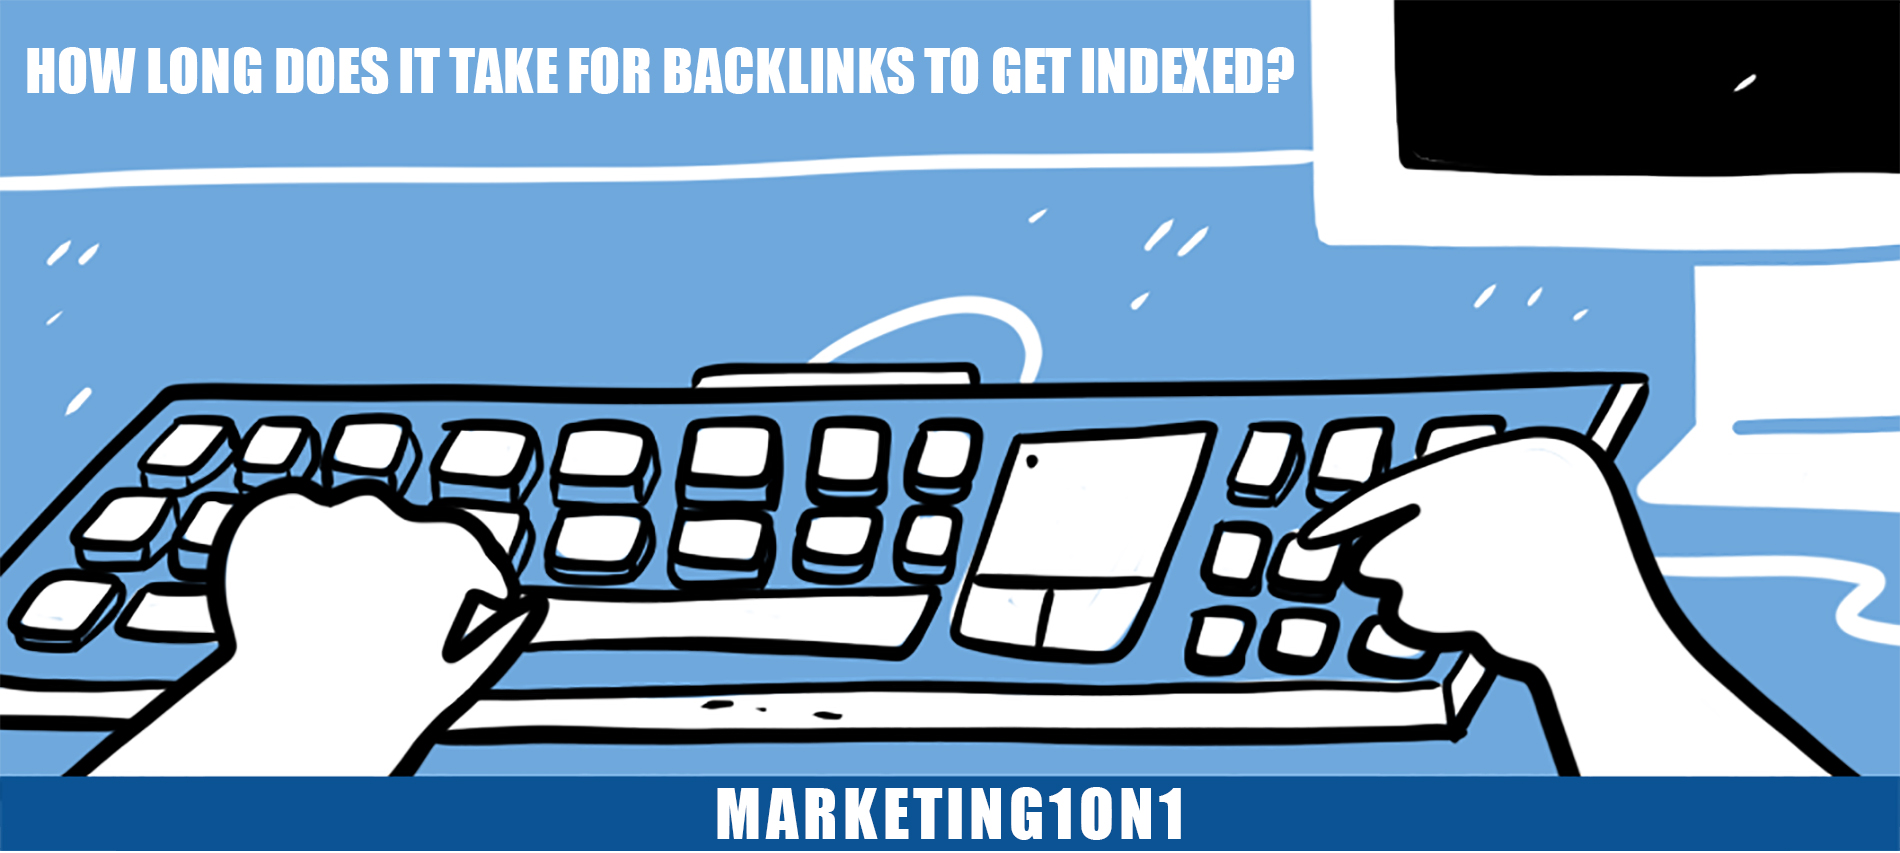 How long does it take for backlinks to get indexed?